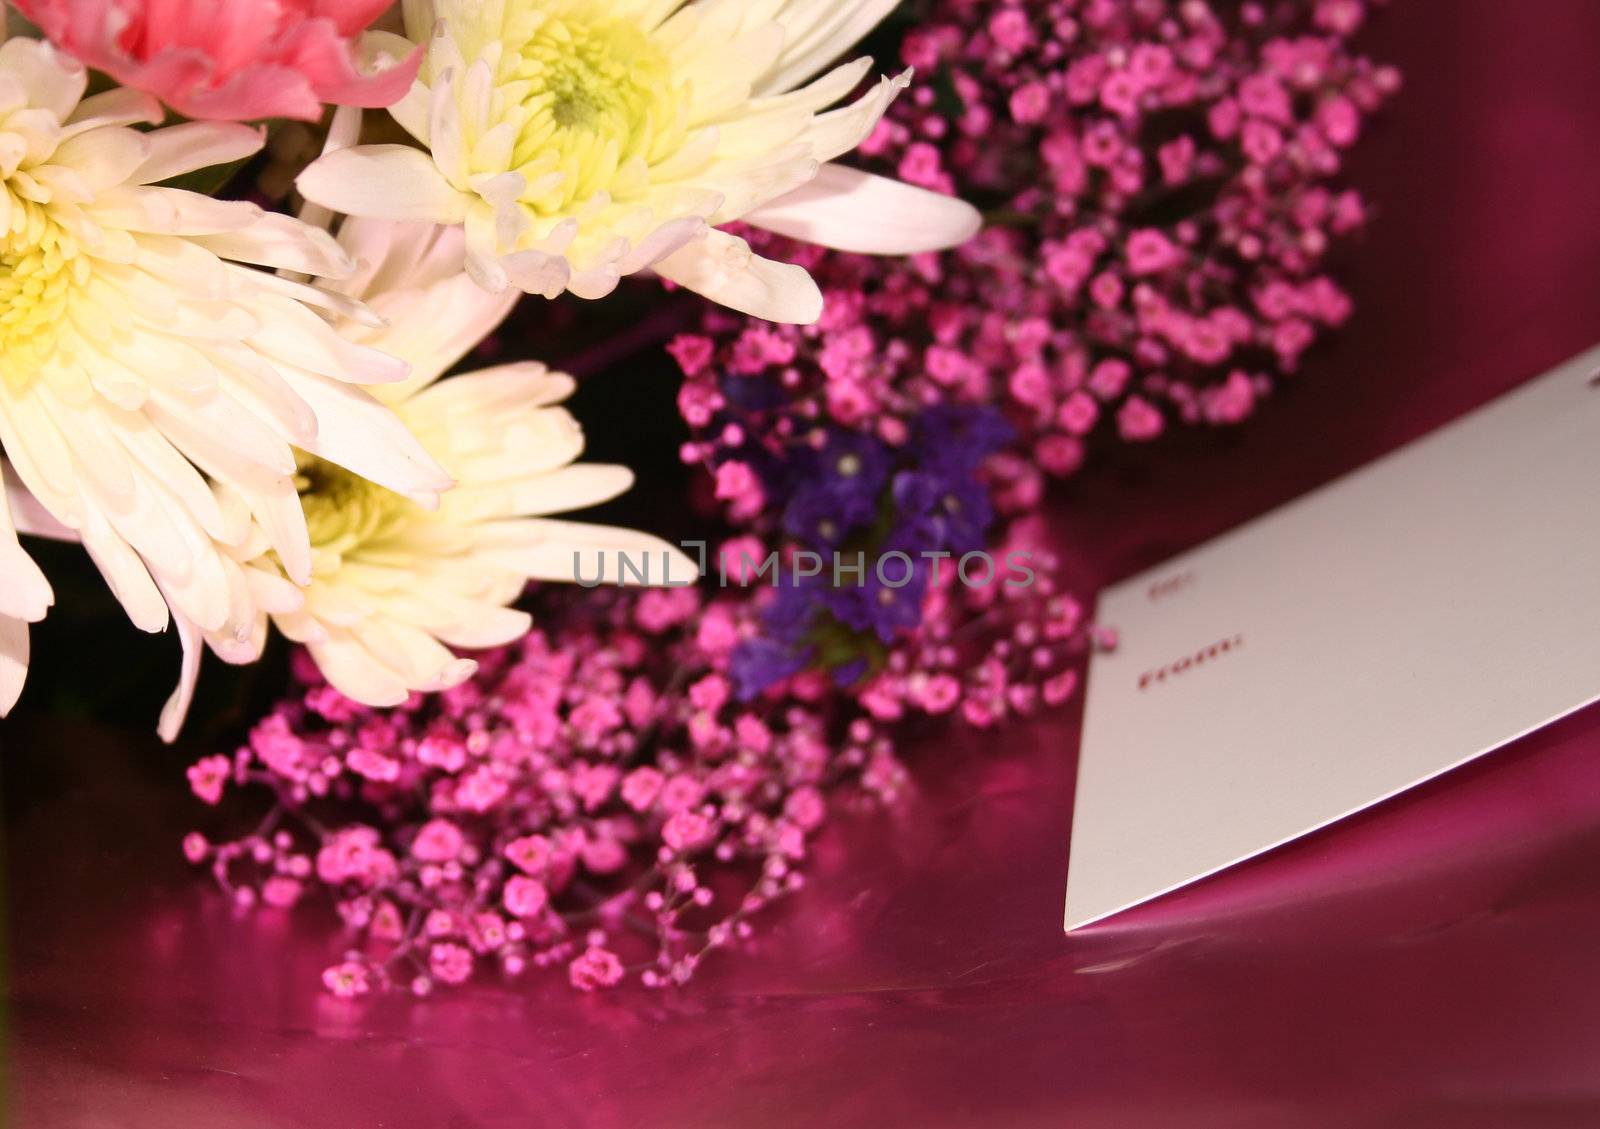 blank card on a bouquet of flowers  